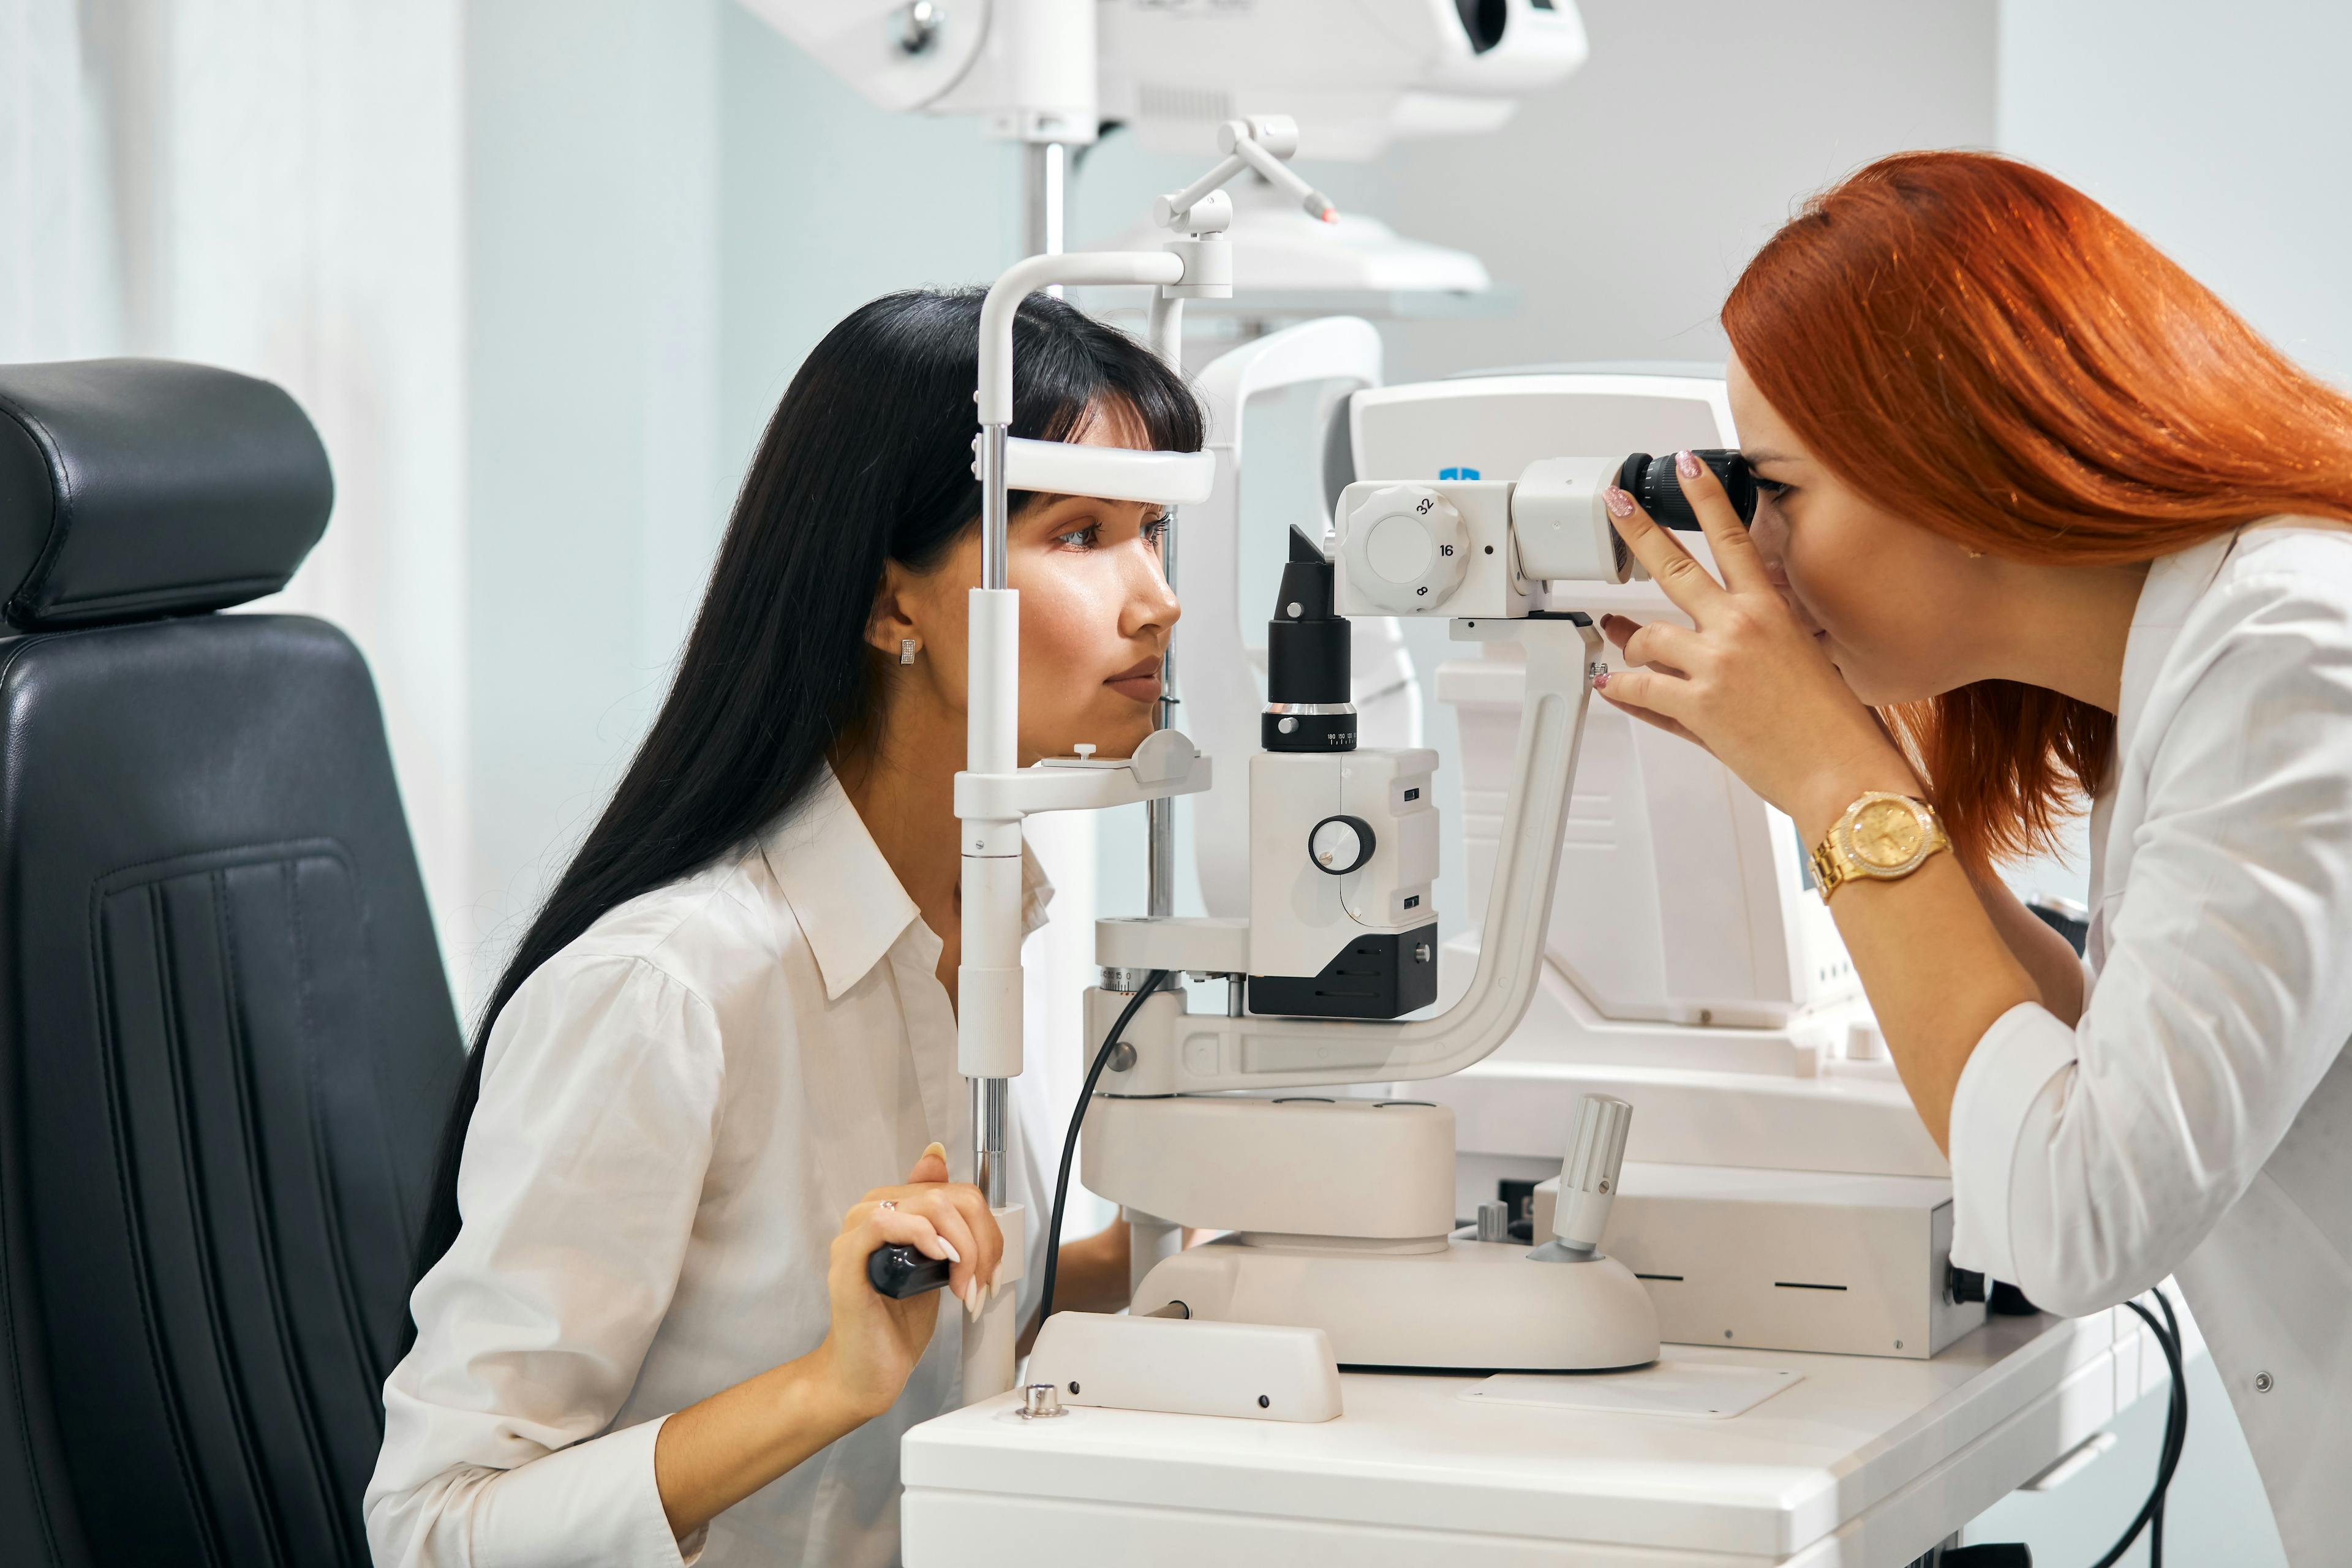 Study results show visual field loss may be an early sign of ocular hypertension